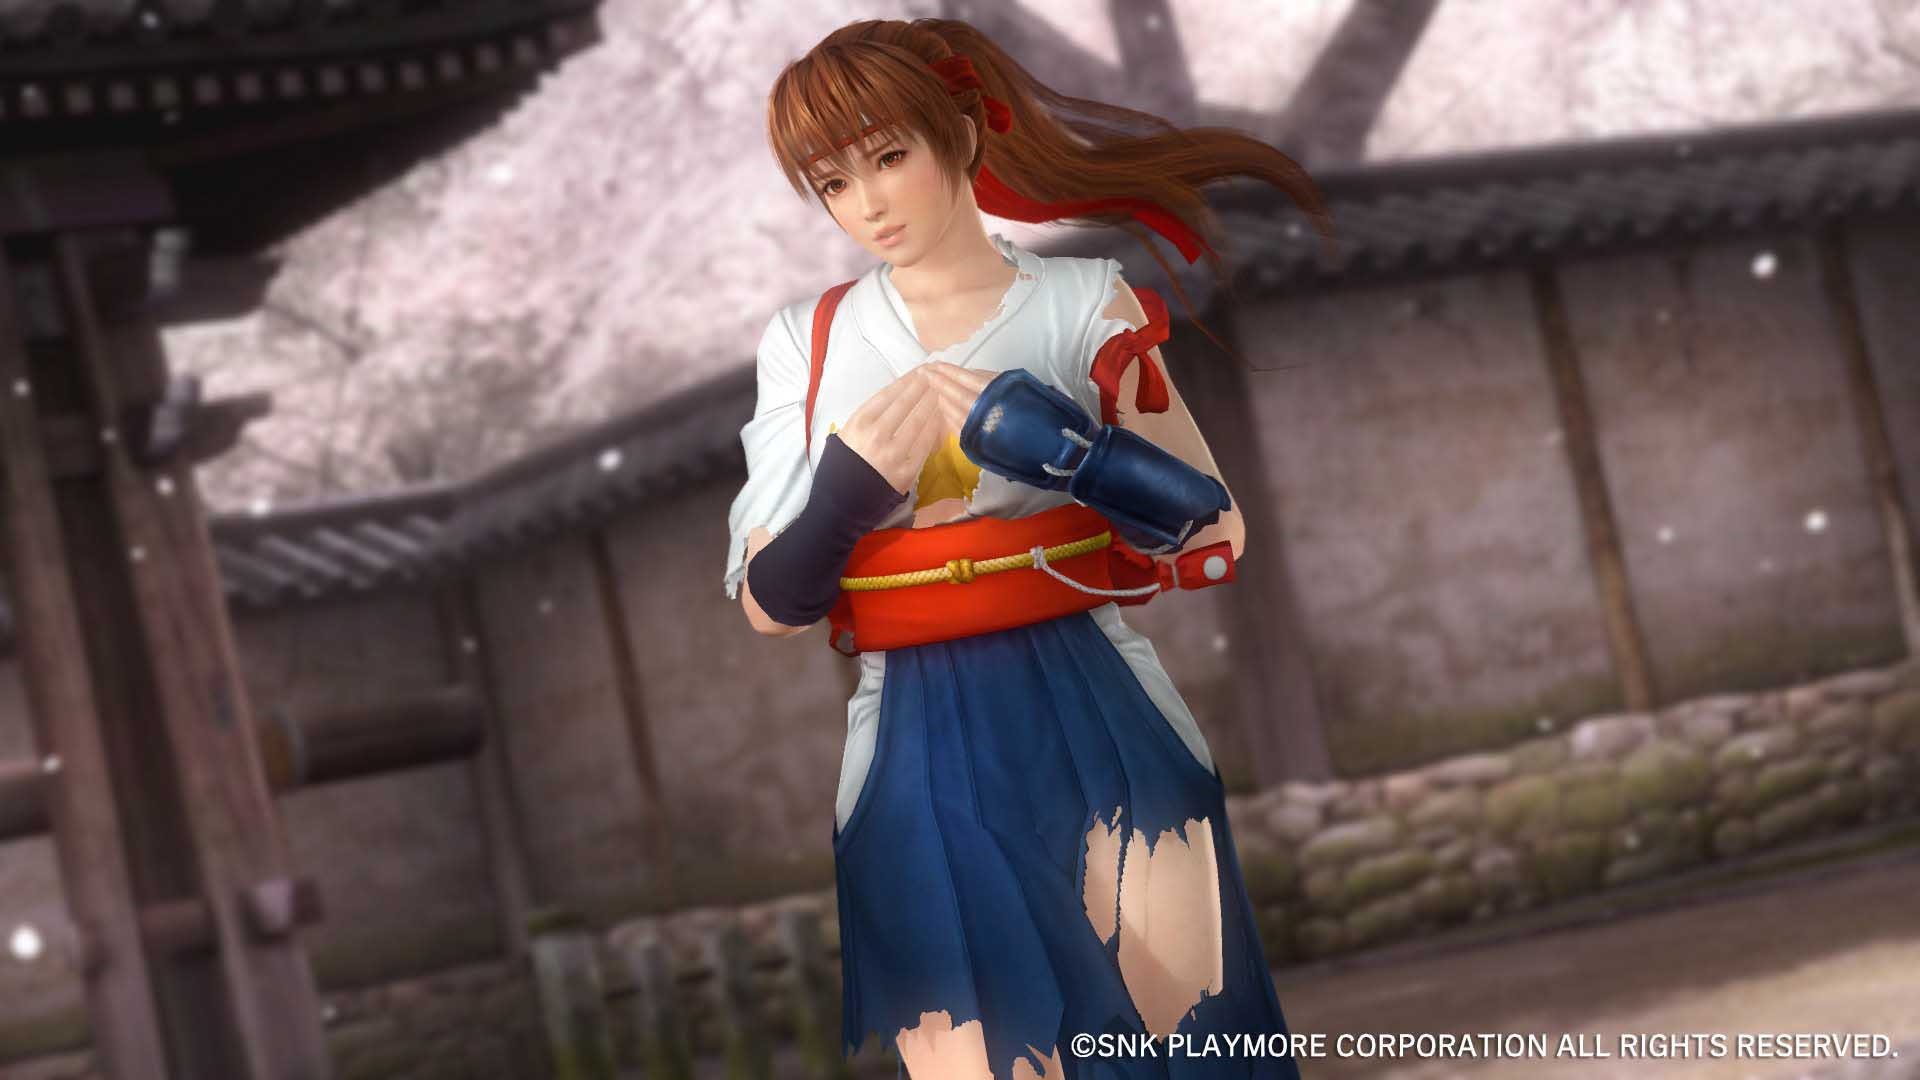 best of Kasumi leifang play lets doa5lr